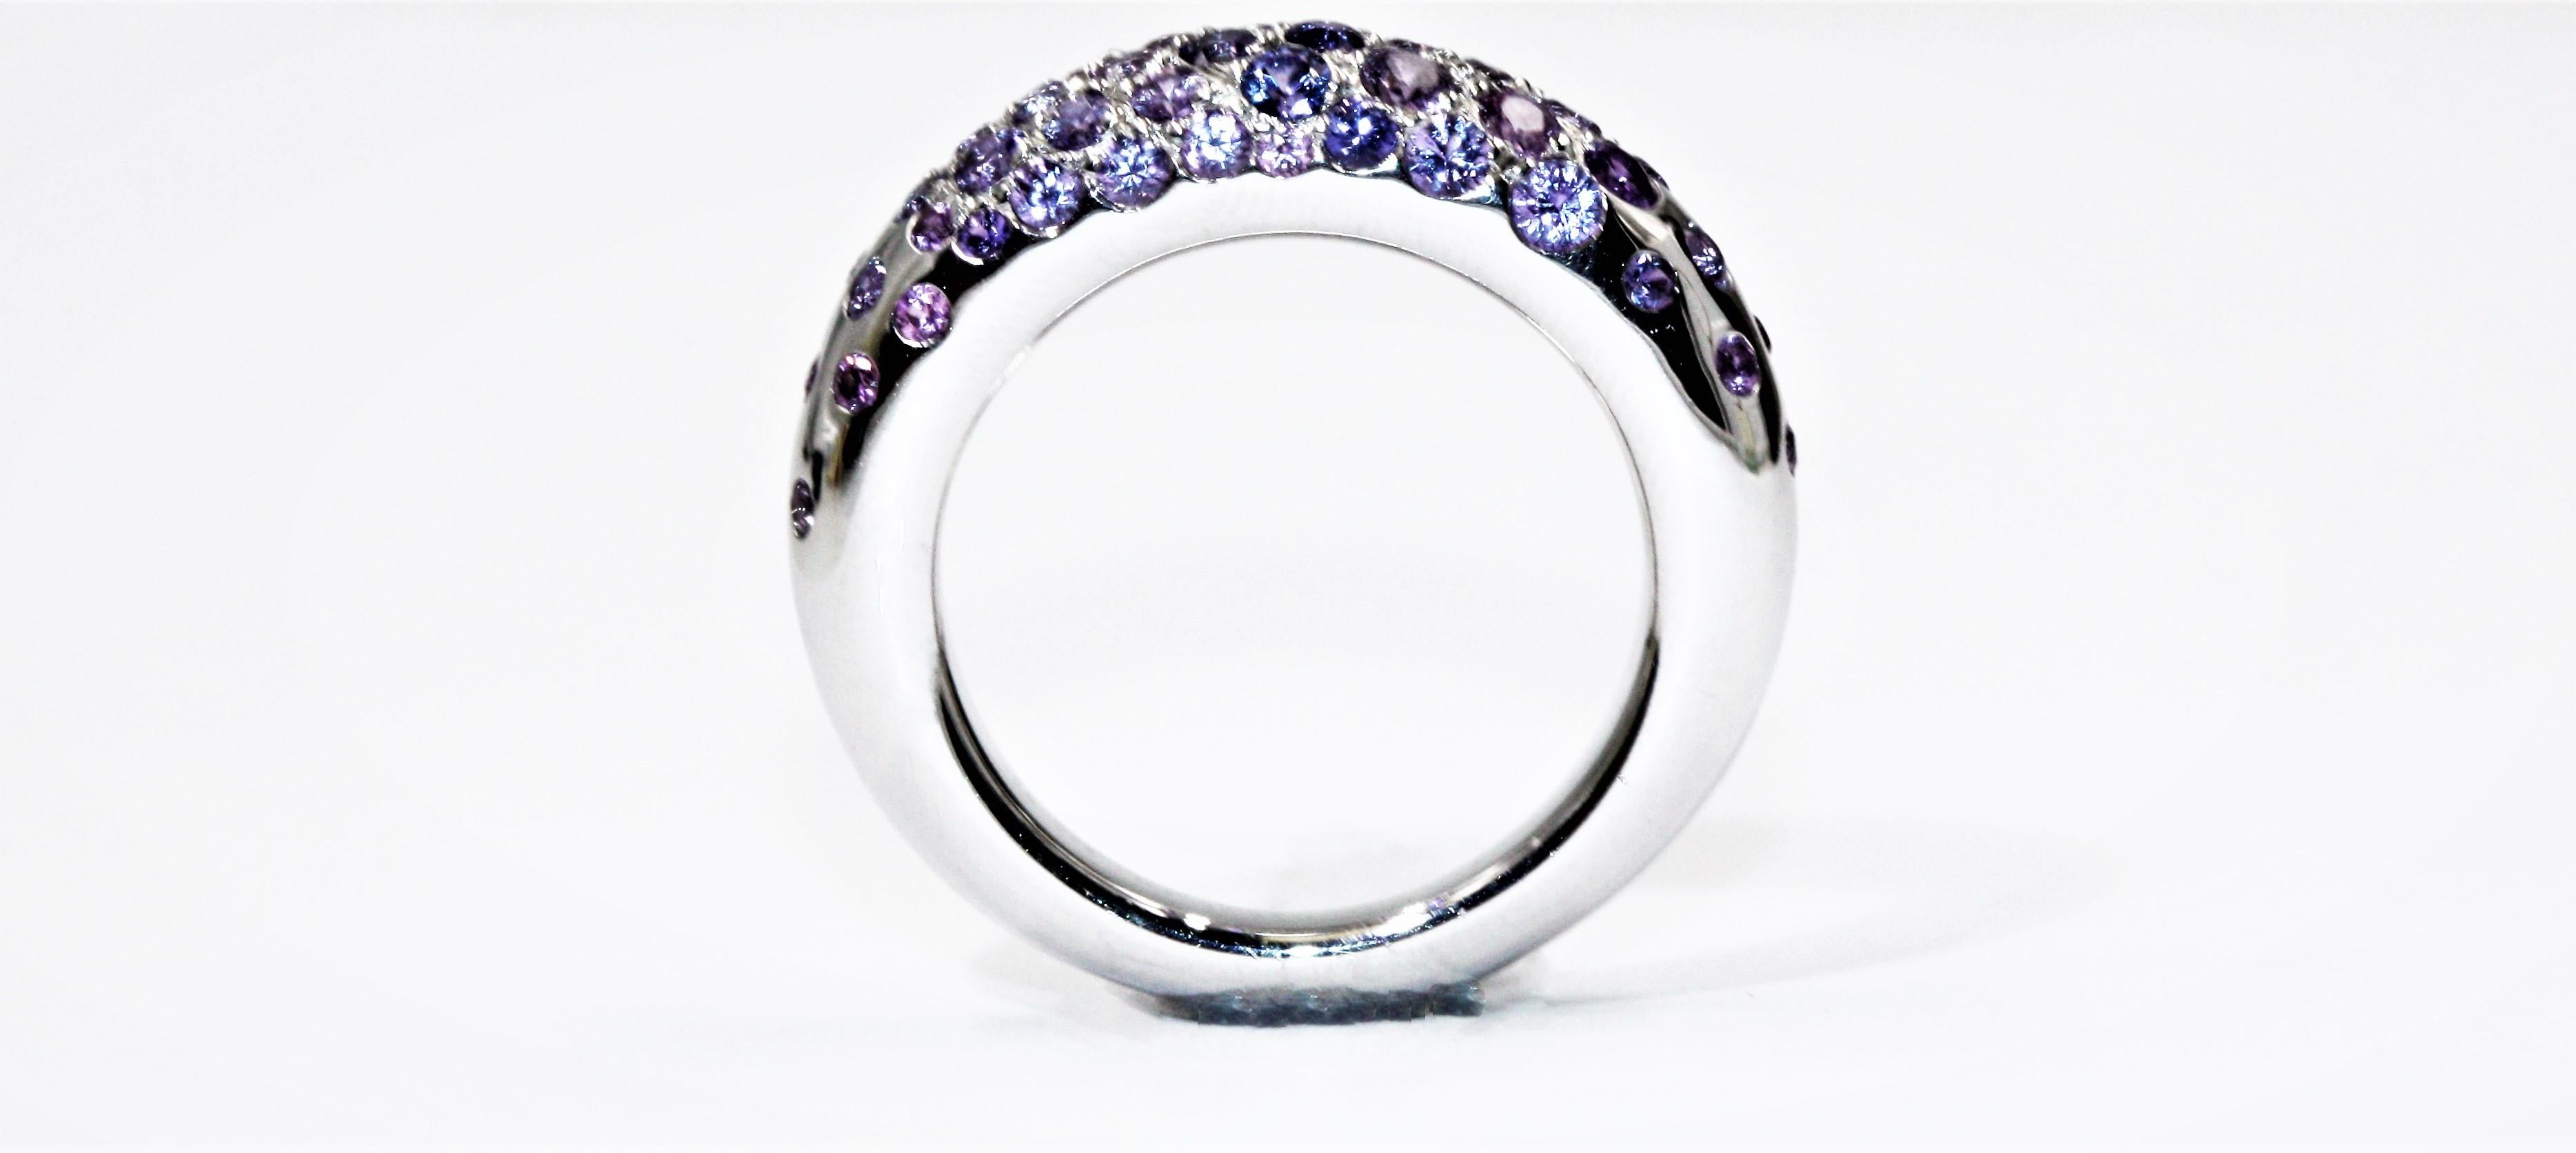 Chaumet 18k white gold Sapphire ring S2.00CT
Blue Sapphire & Purple Sapphire
Gender: Women
Material: 18K White Gold
Ring Size: US:6.75 EU:54
Weight: approximately 9.4g
Item come with an original box
CMT005